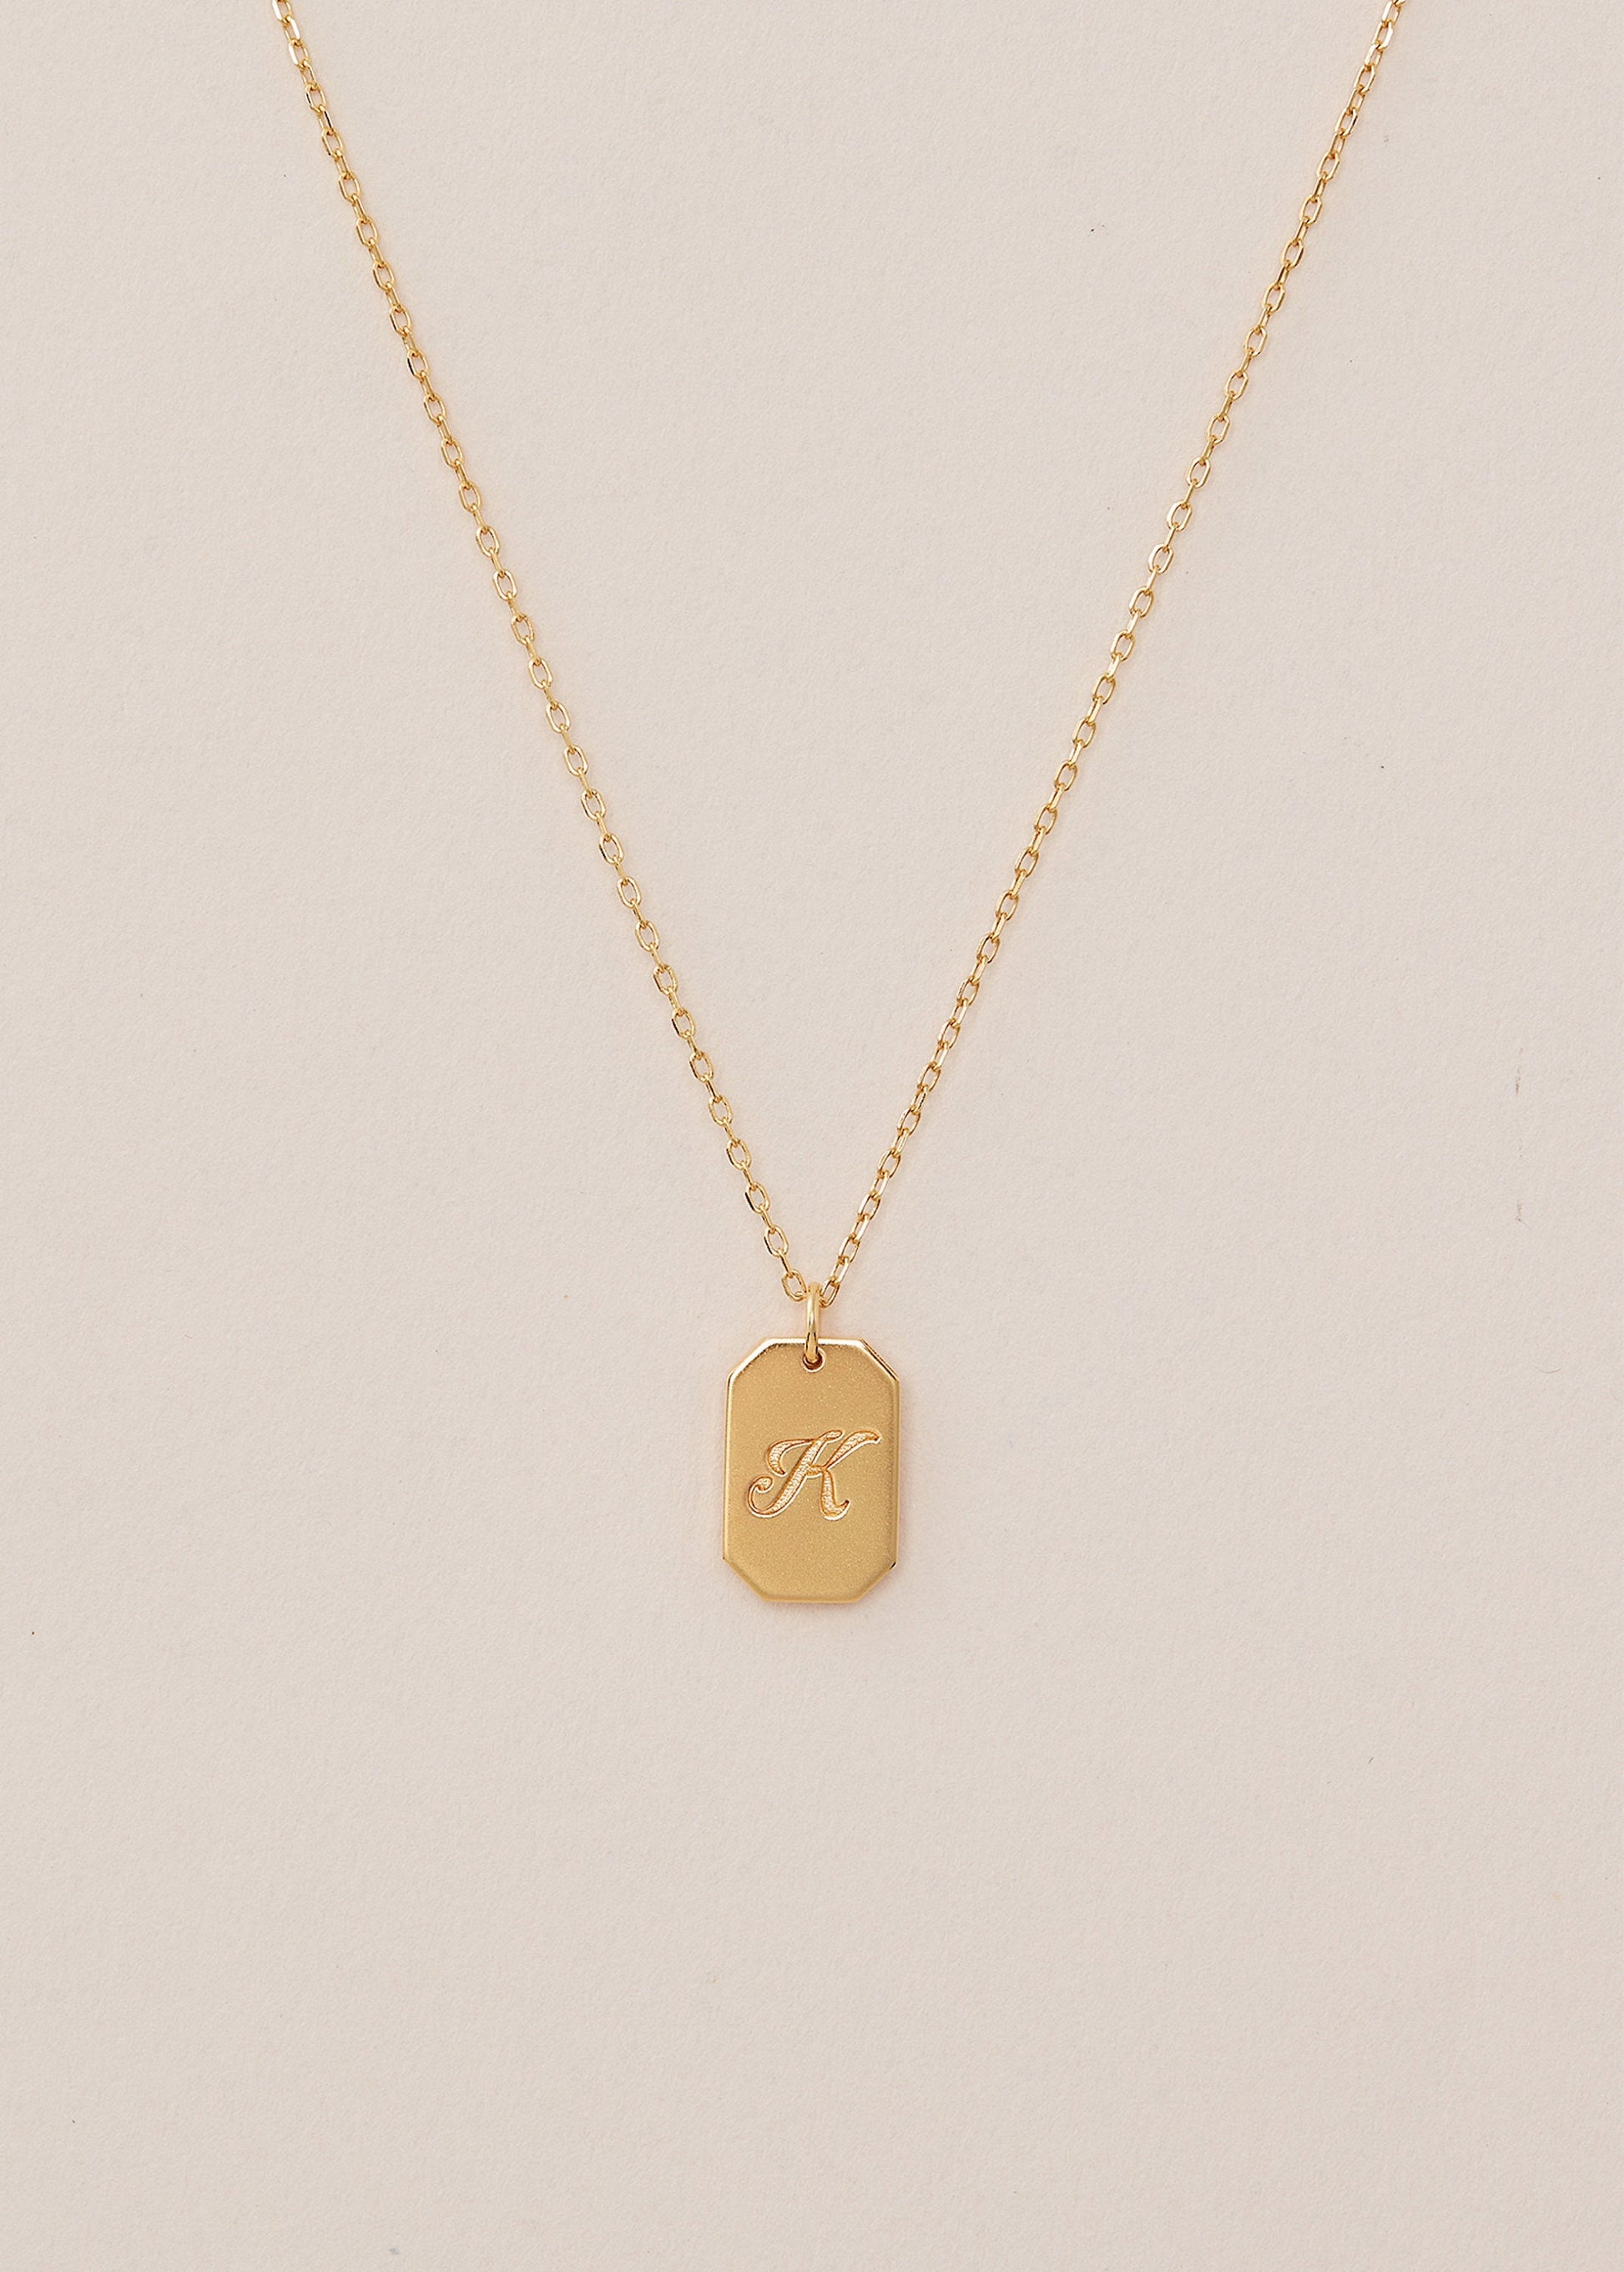 Mini Dog Tag Necklace in Silver or Gold 14K Yellow Gold / Charm Only